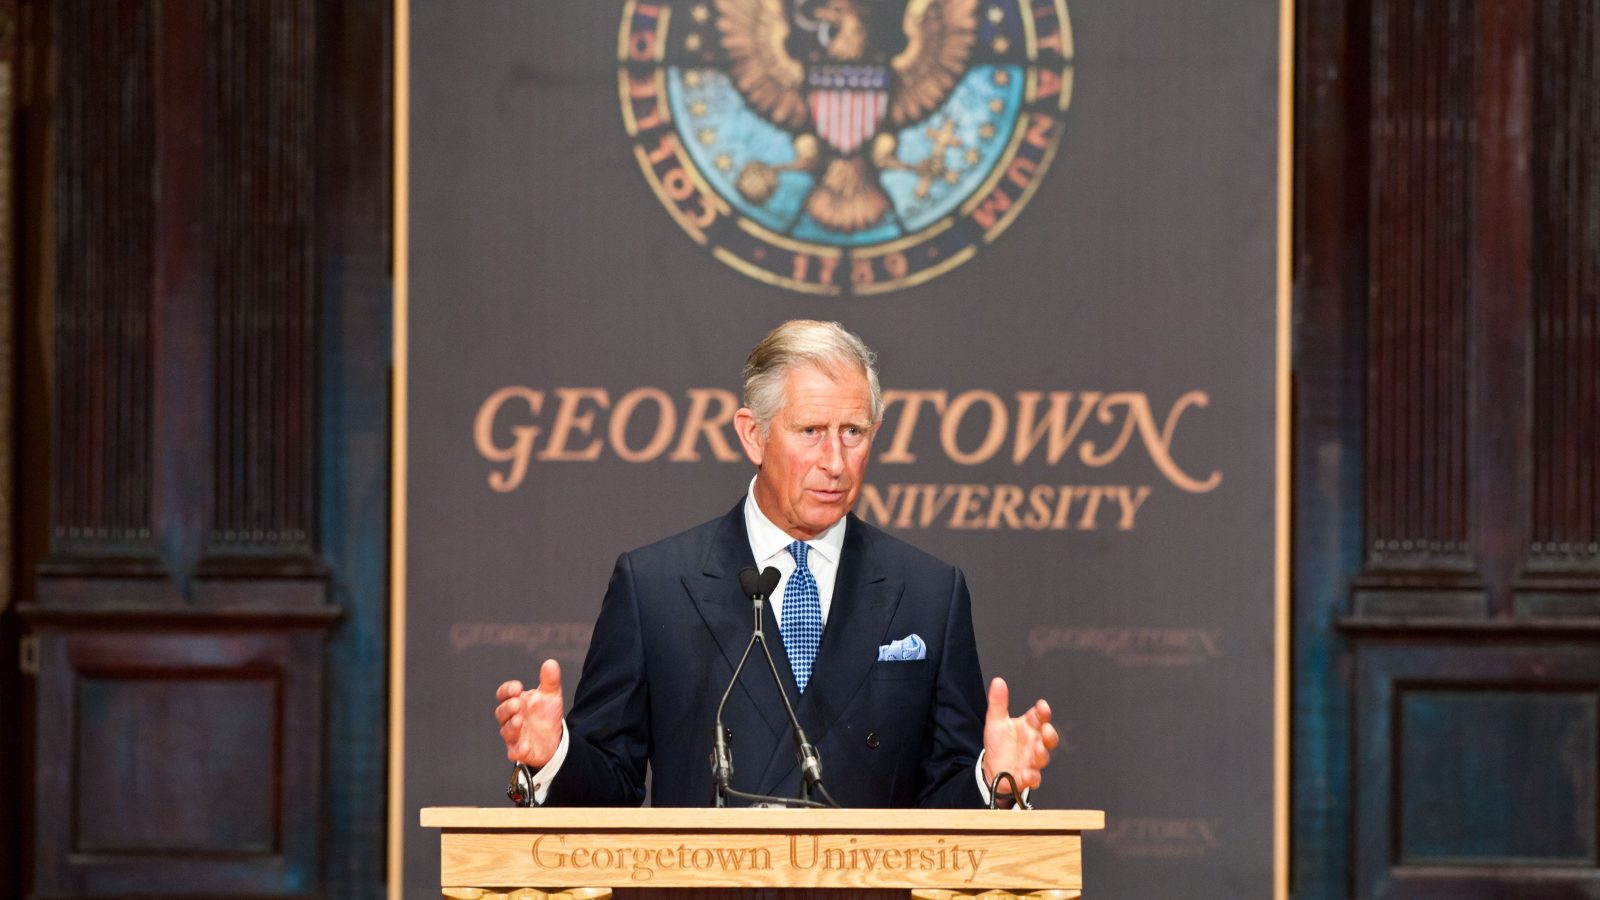 King Charles stands at a podium to deliver remarks at an event in Gaston Hall.